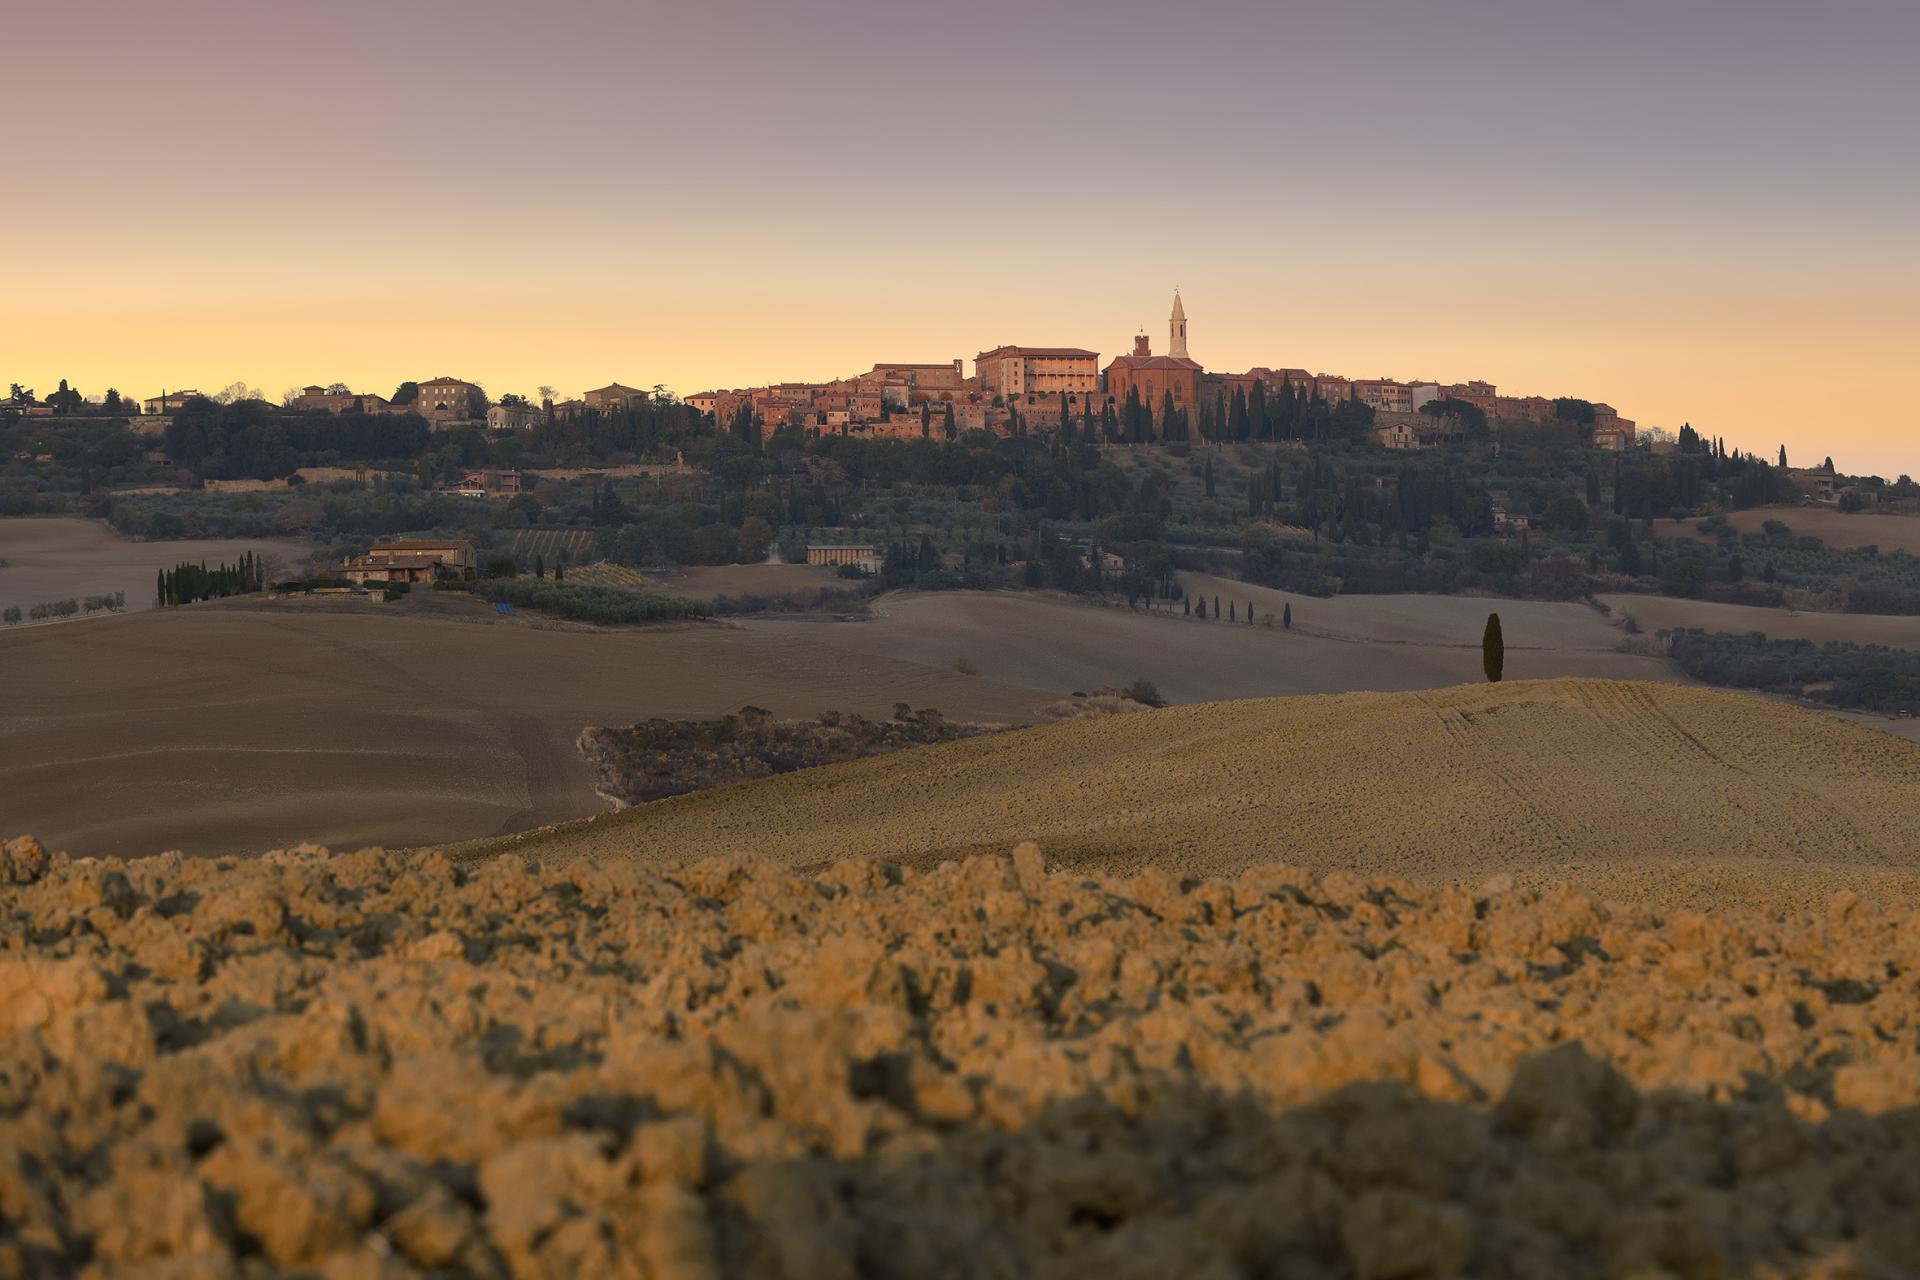 London Photography Awards Winner - Val d'Orcia Land in Autumn